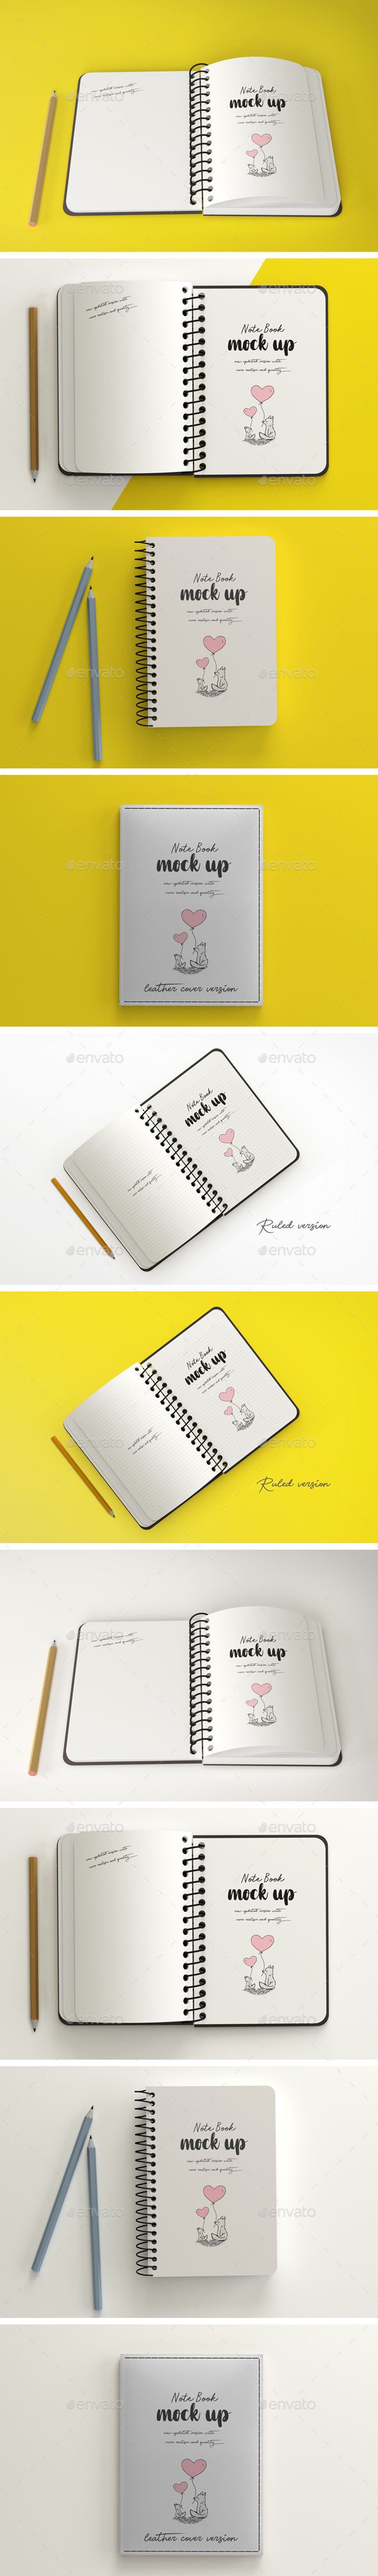 Notebook Mockup PSD. Download here: https://graphicriver.net/item